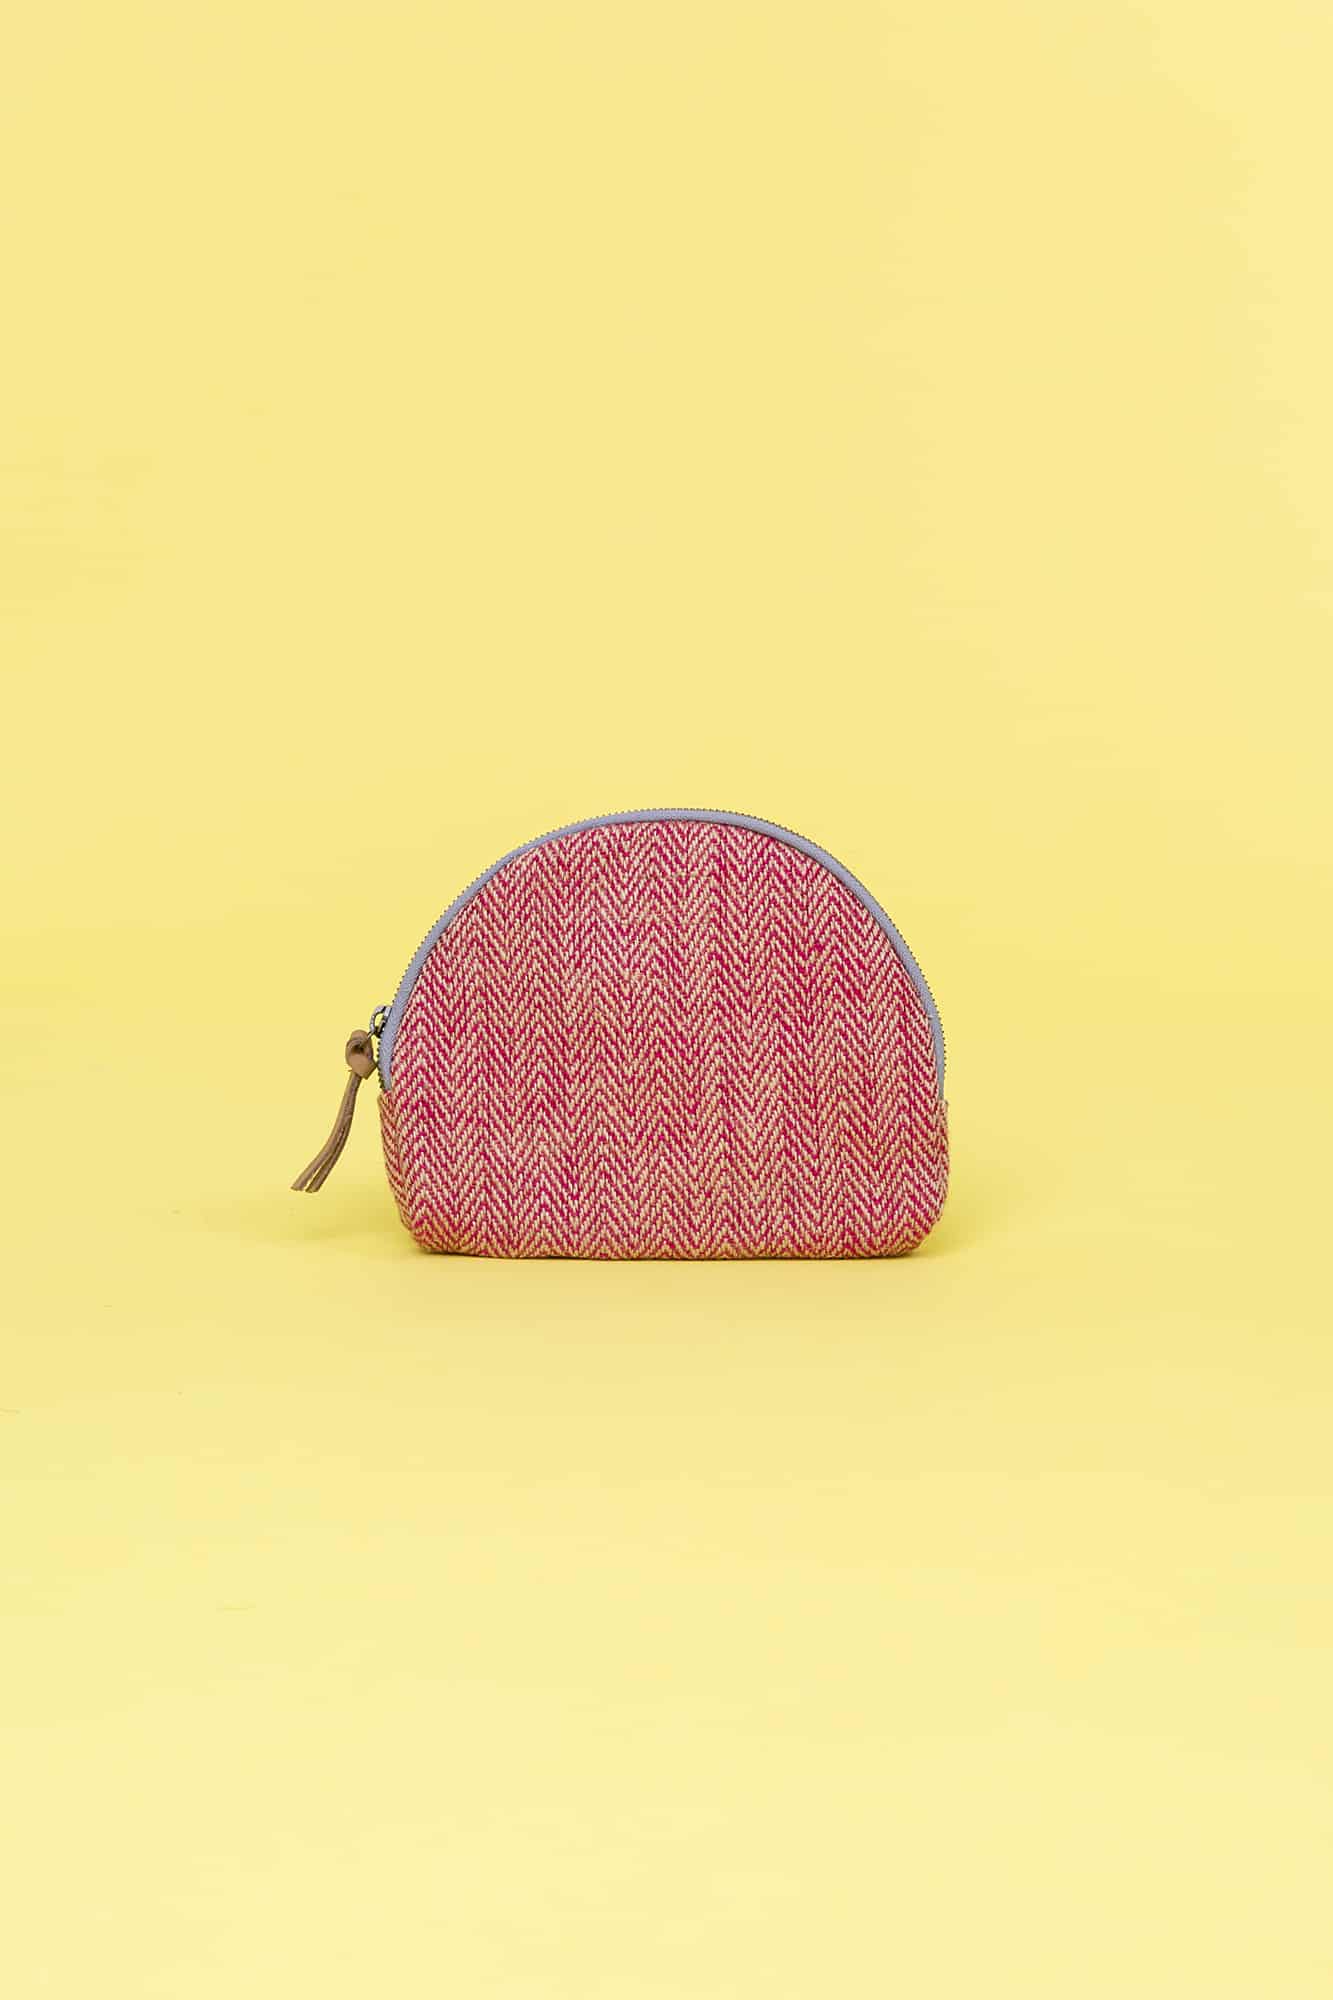 Wallet or purse bag for women in sustainable materials